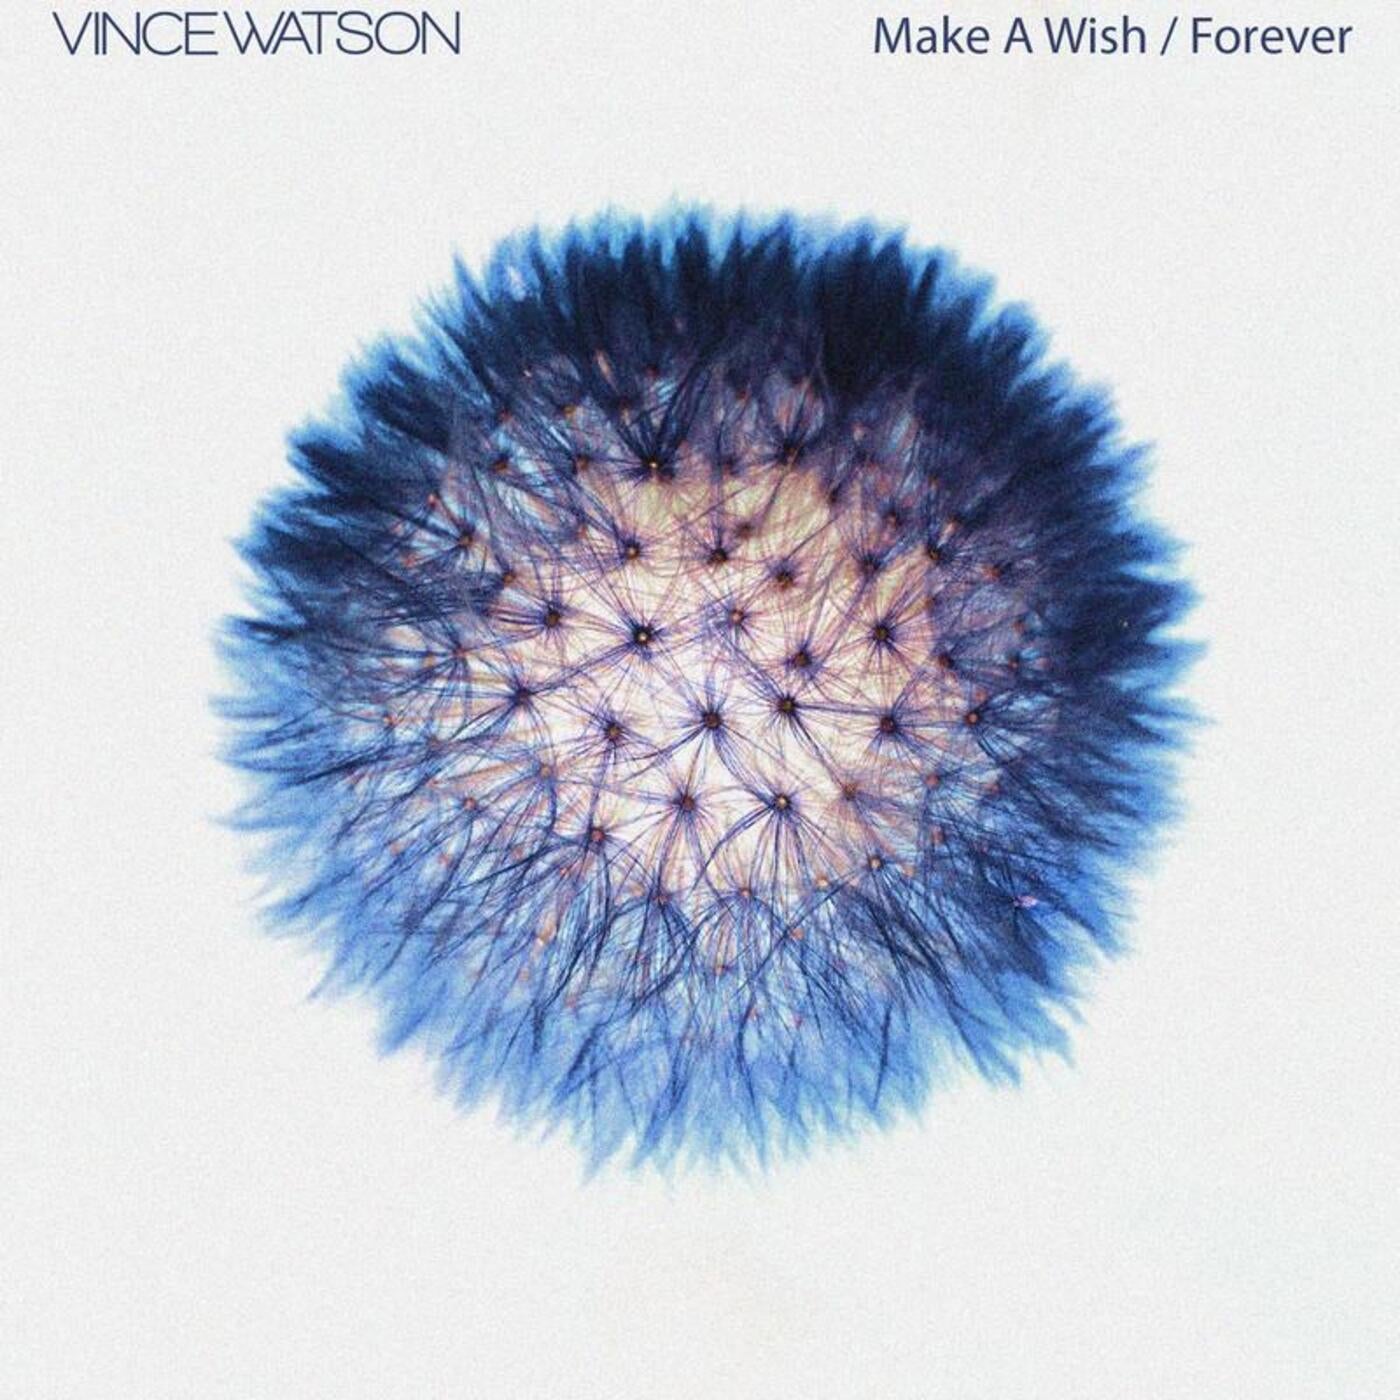 Download Make a Wish / Forever on Electrobuzz